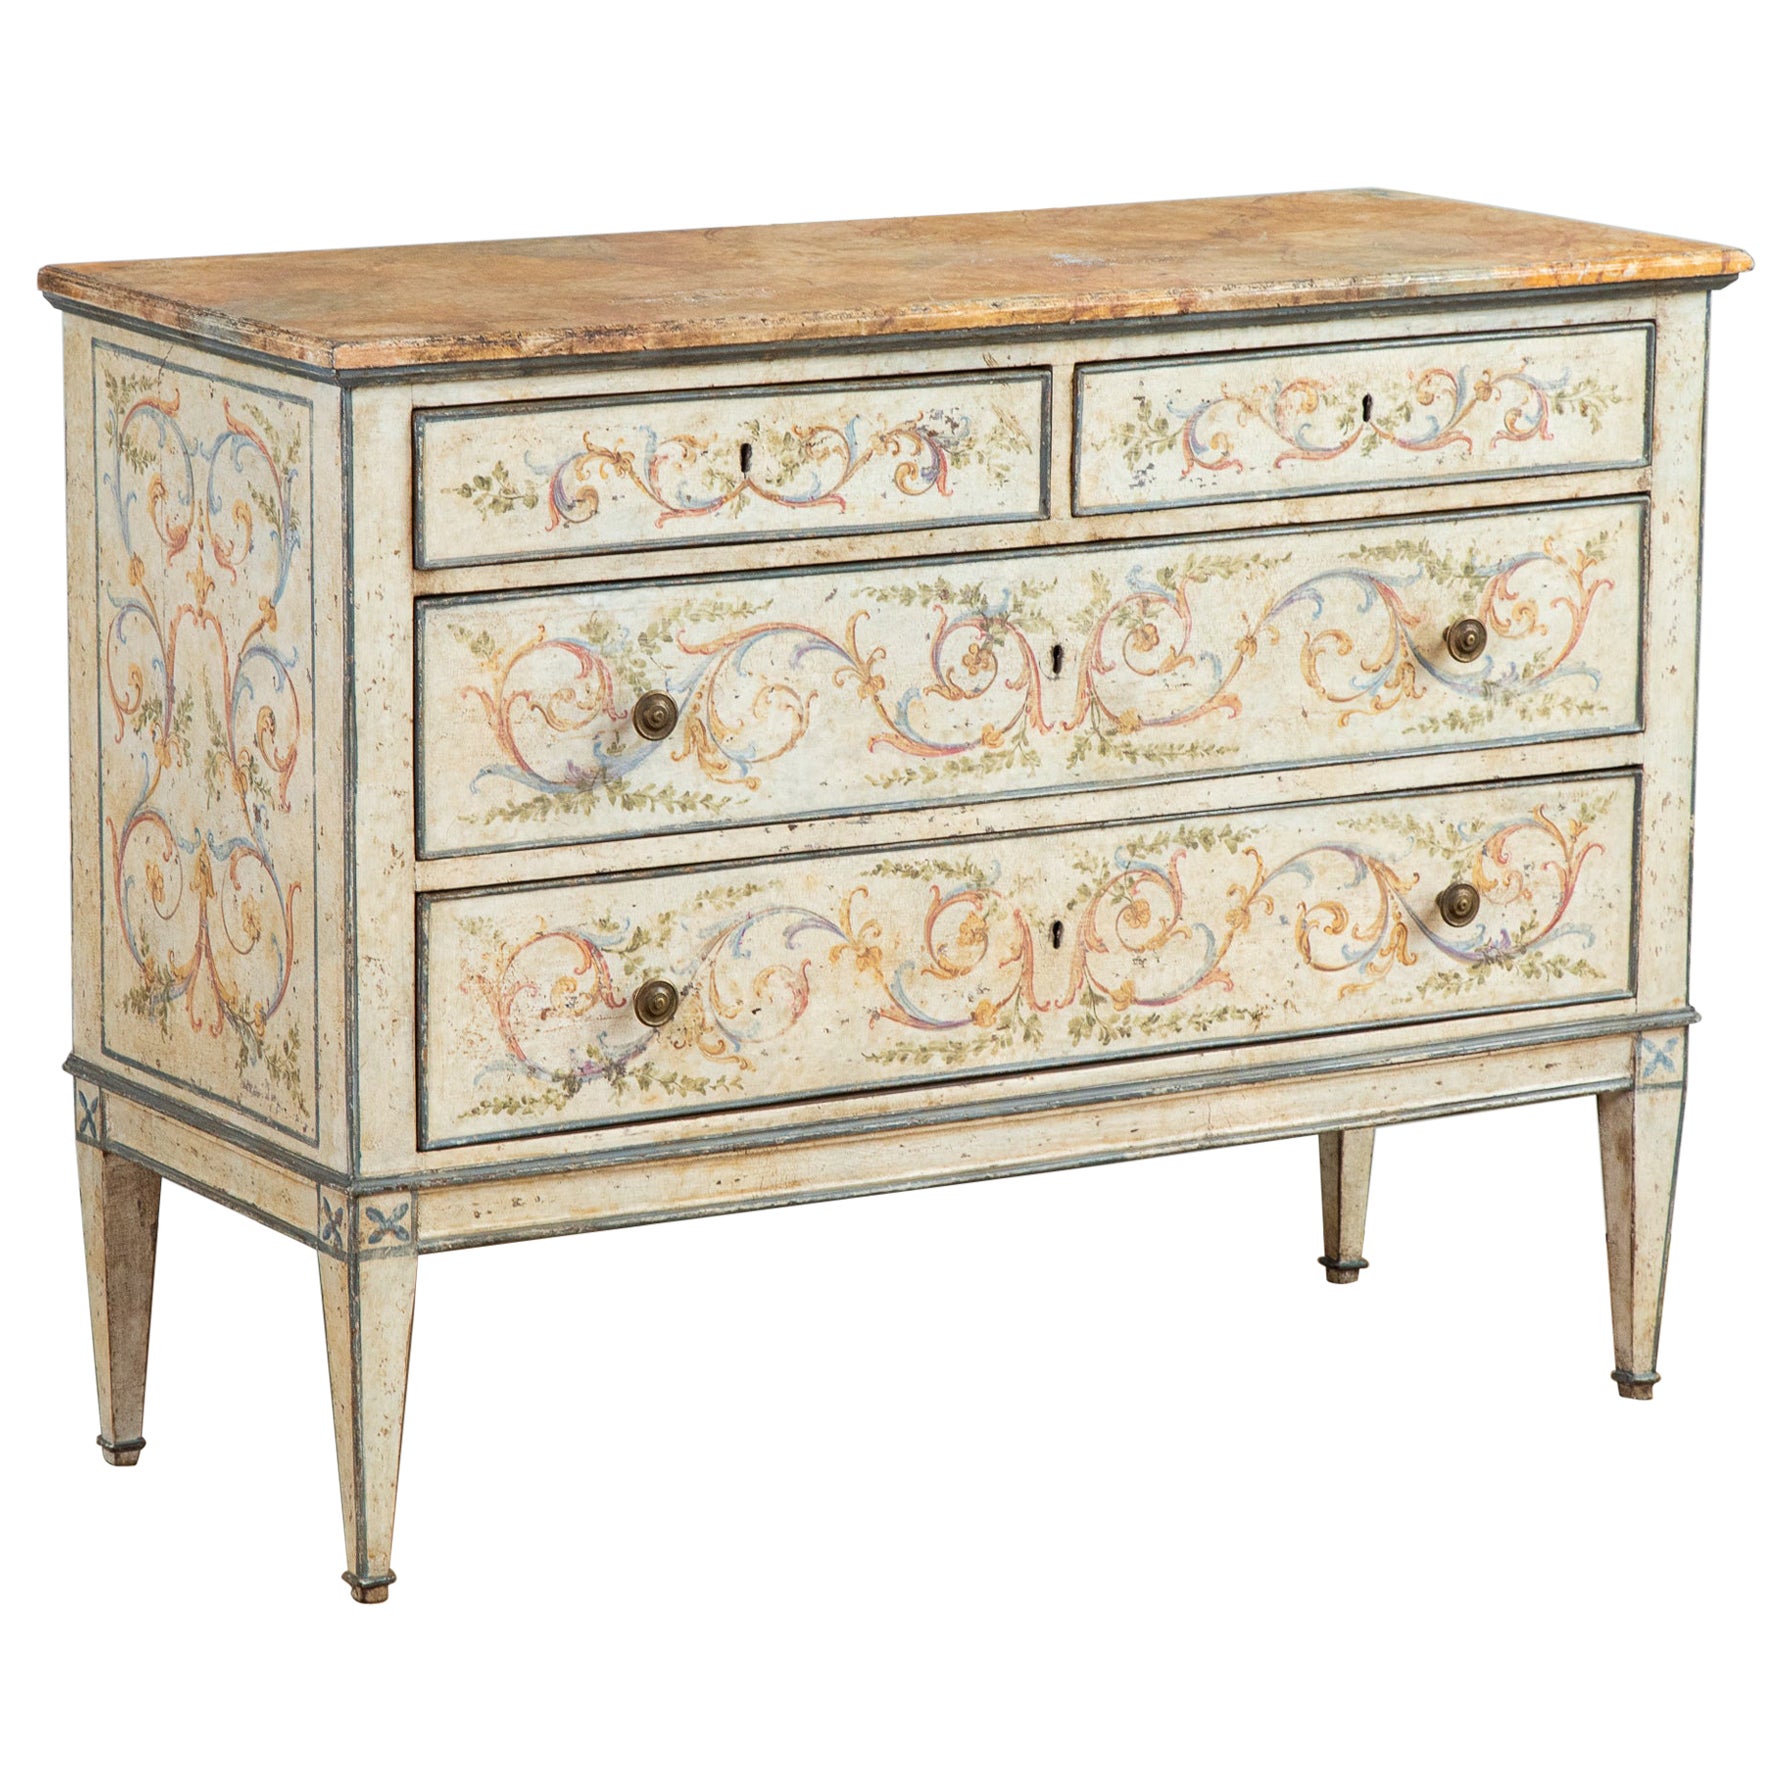 19th Century Venetian Neoclassical style Hand Painted Commode For Sale